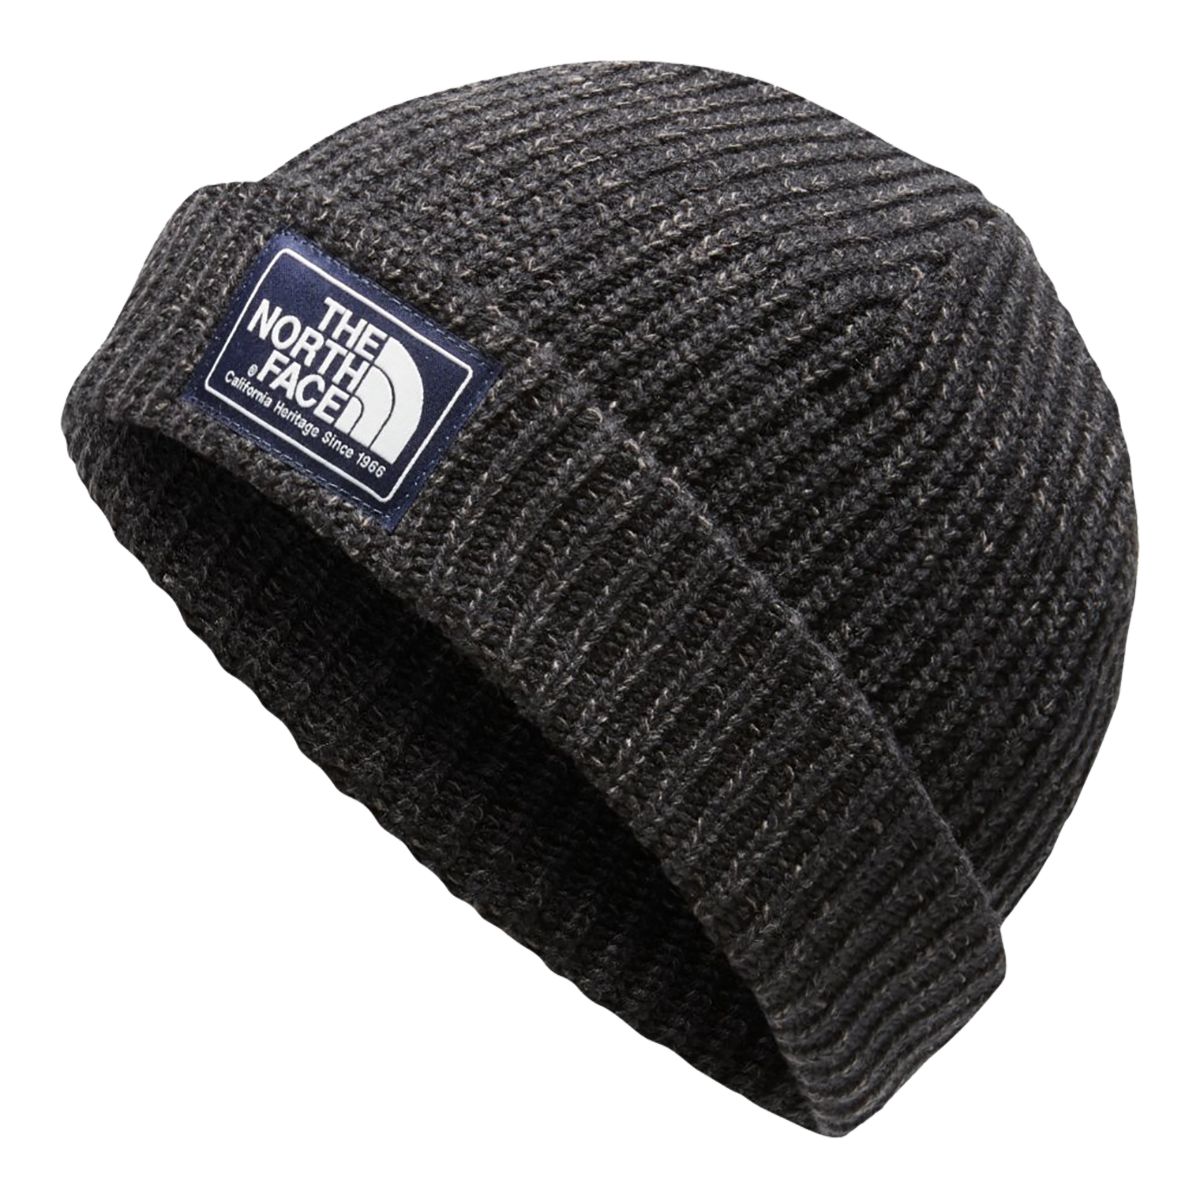 Image of The North Face Men's Salty Dog Beanie